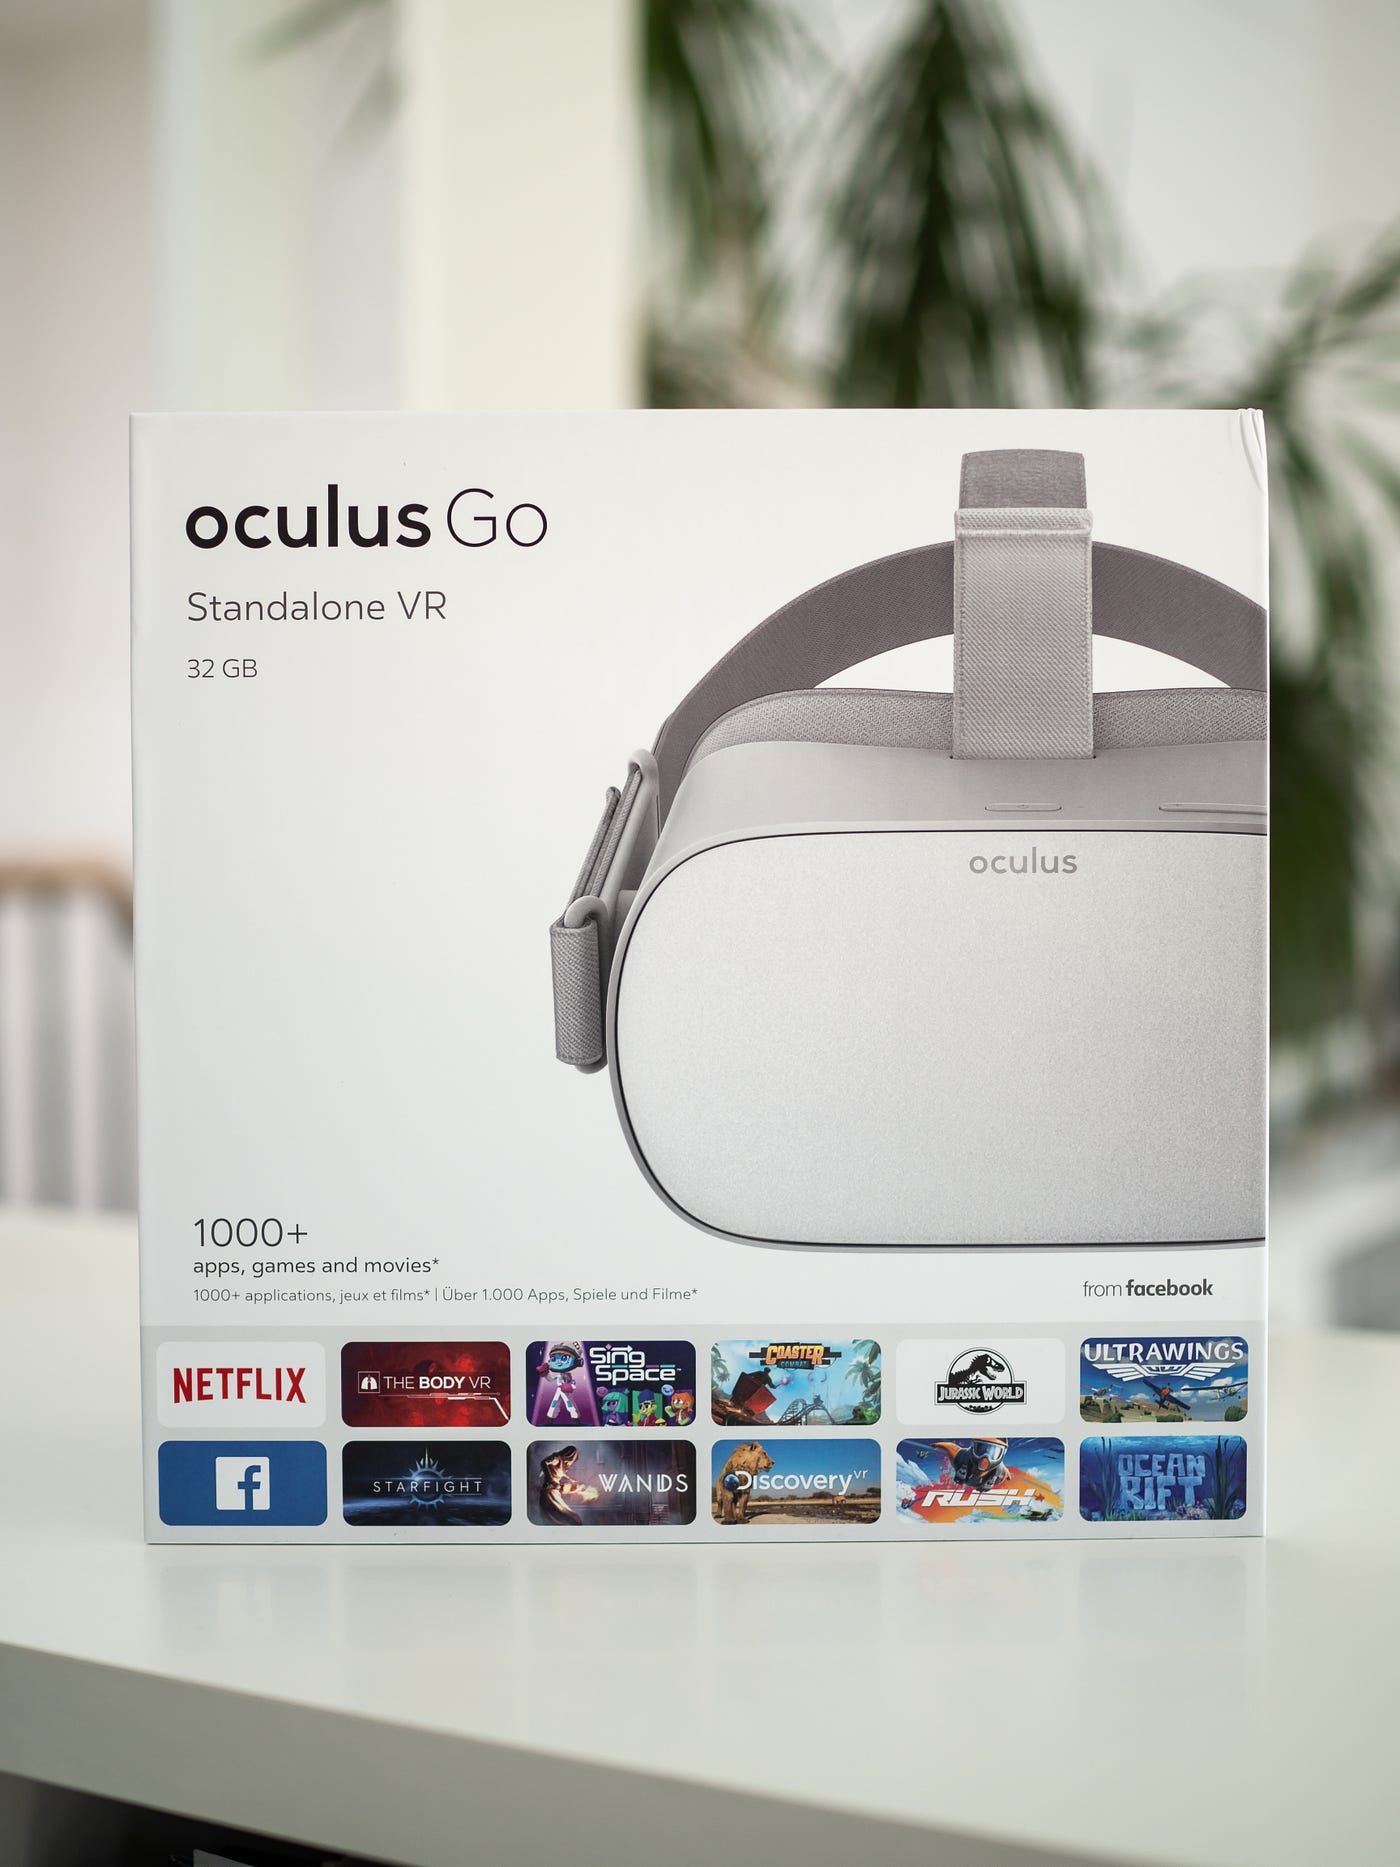 The Top 4 Reasons Why Oculus Go is Making VR for Business More